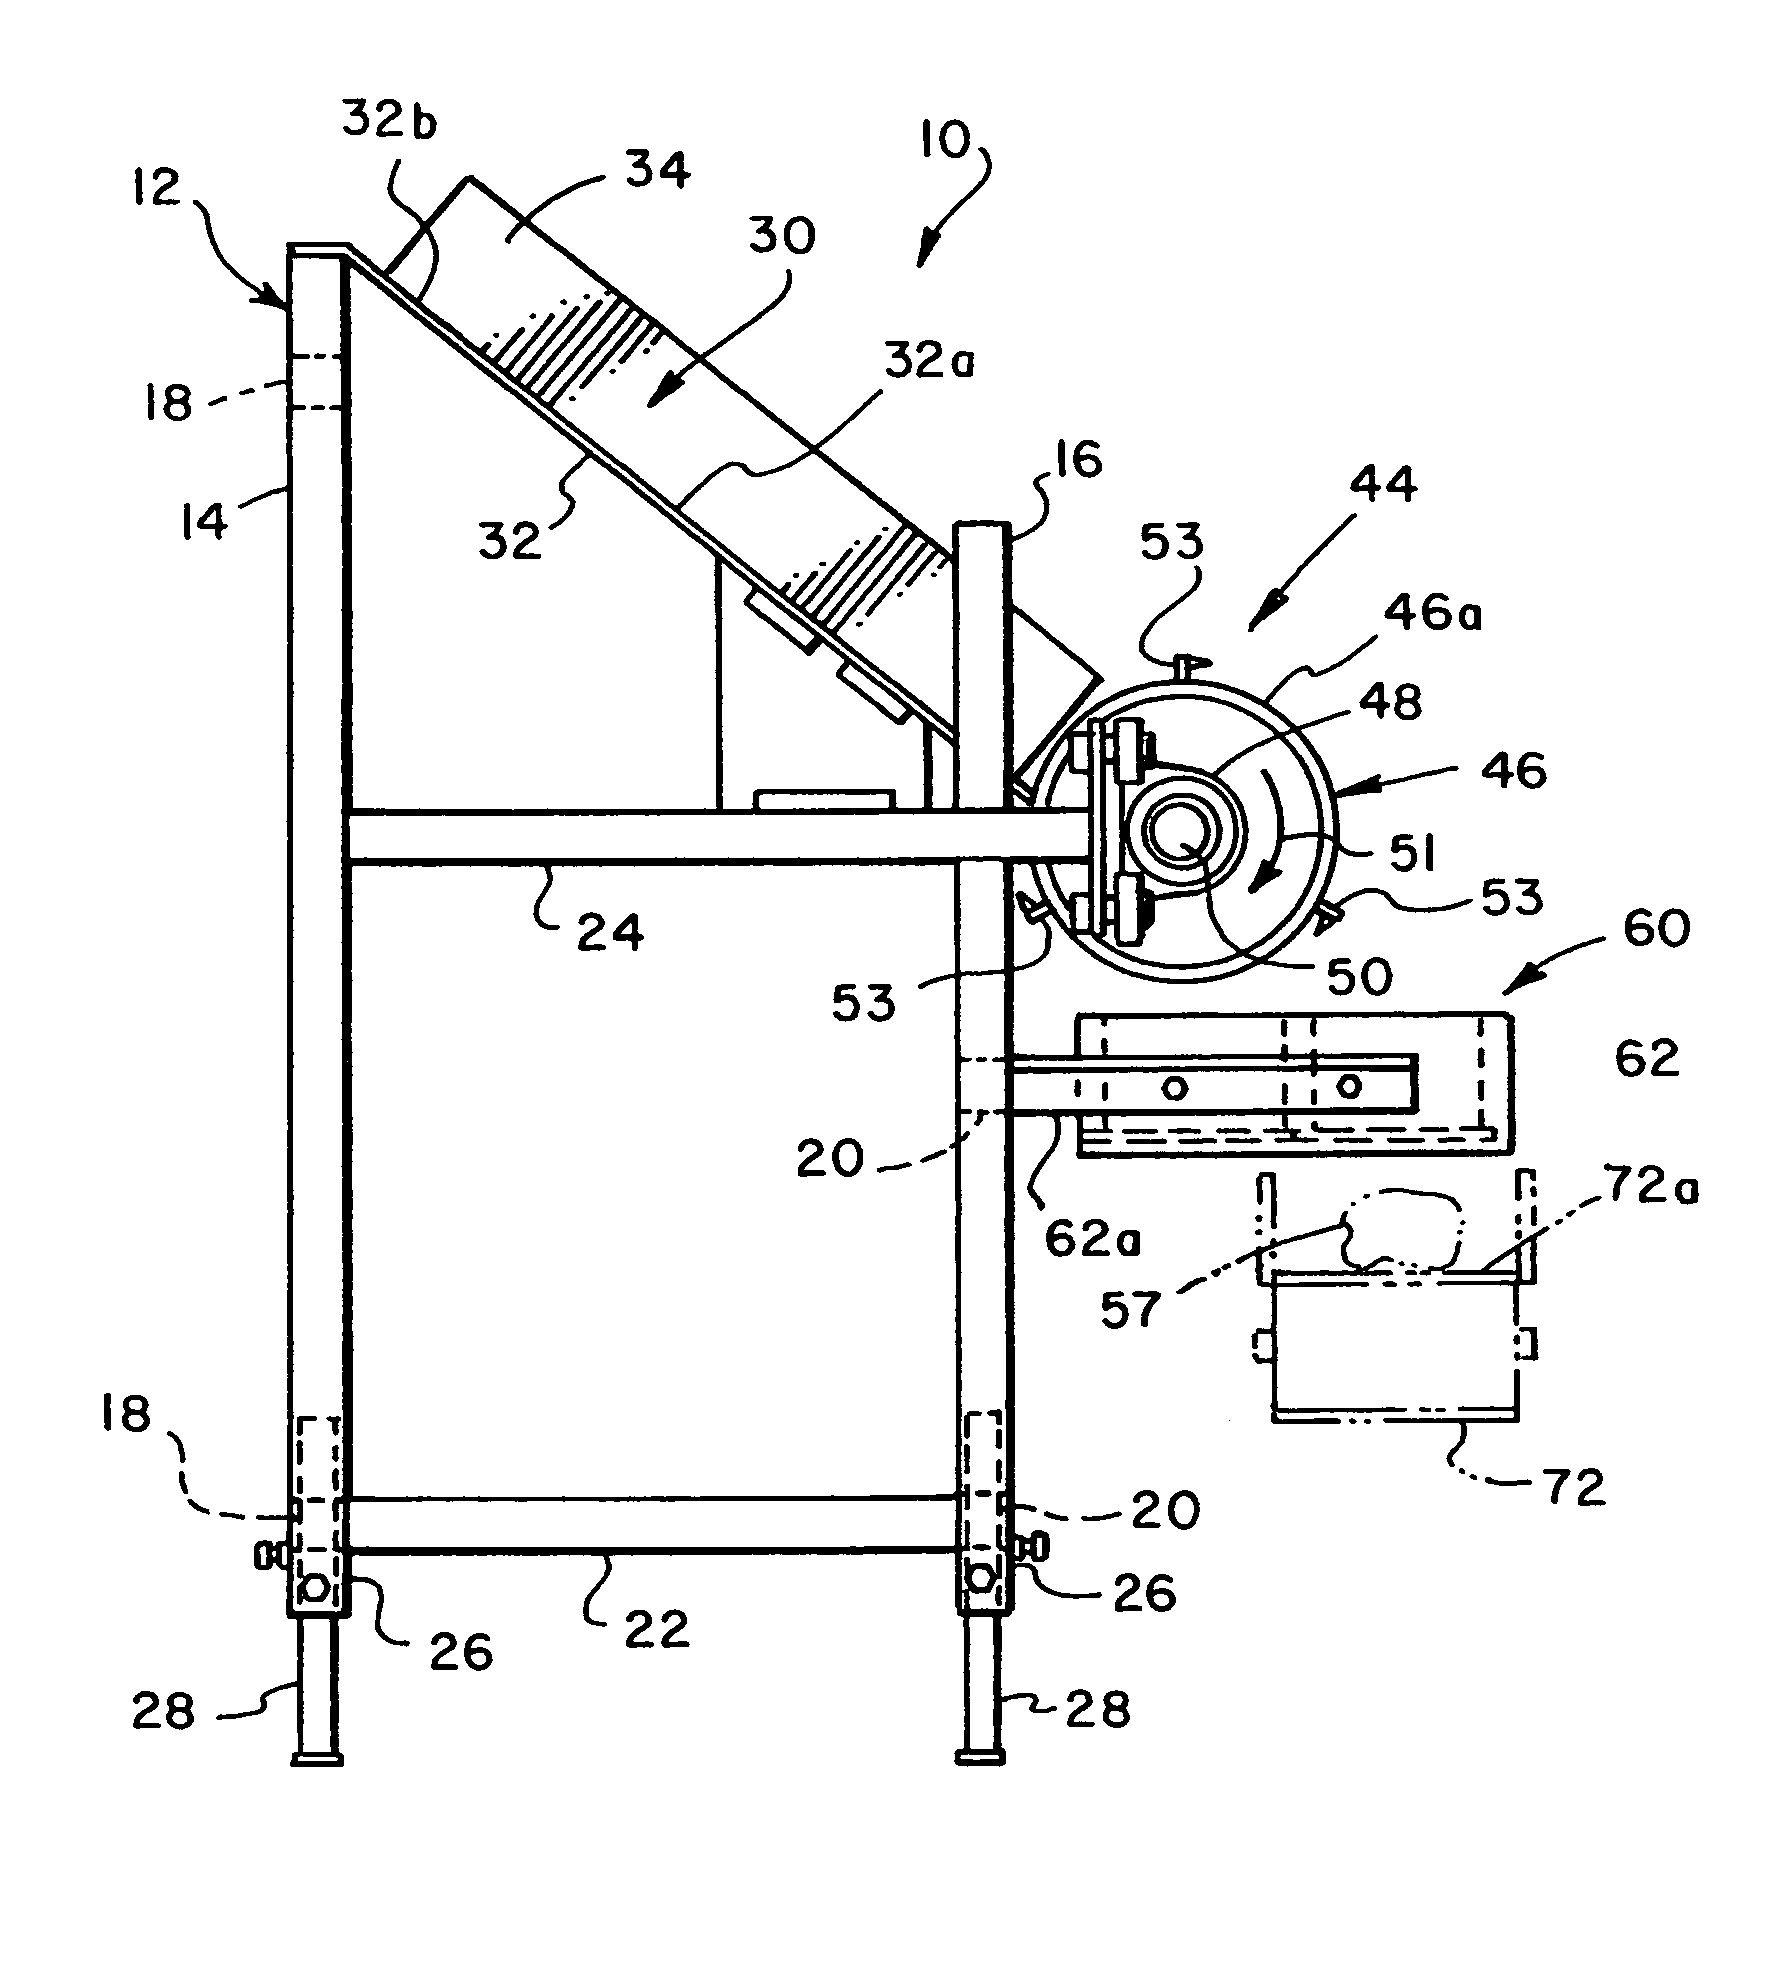 Apparatus for separating and conveying articles